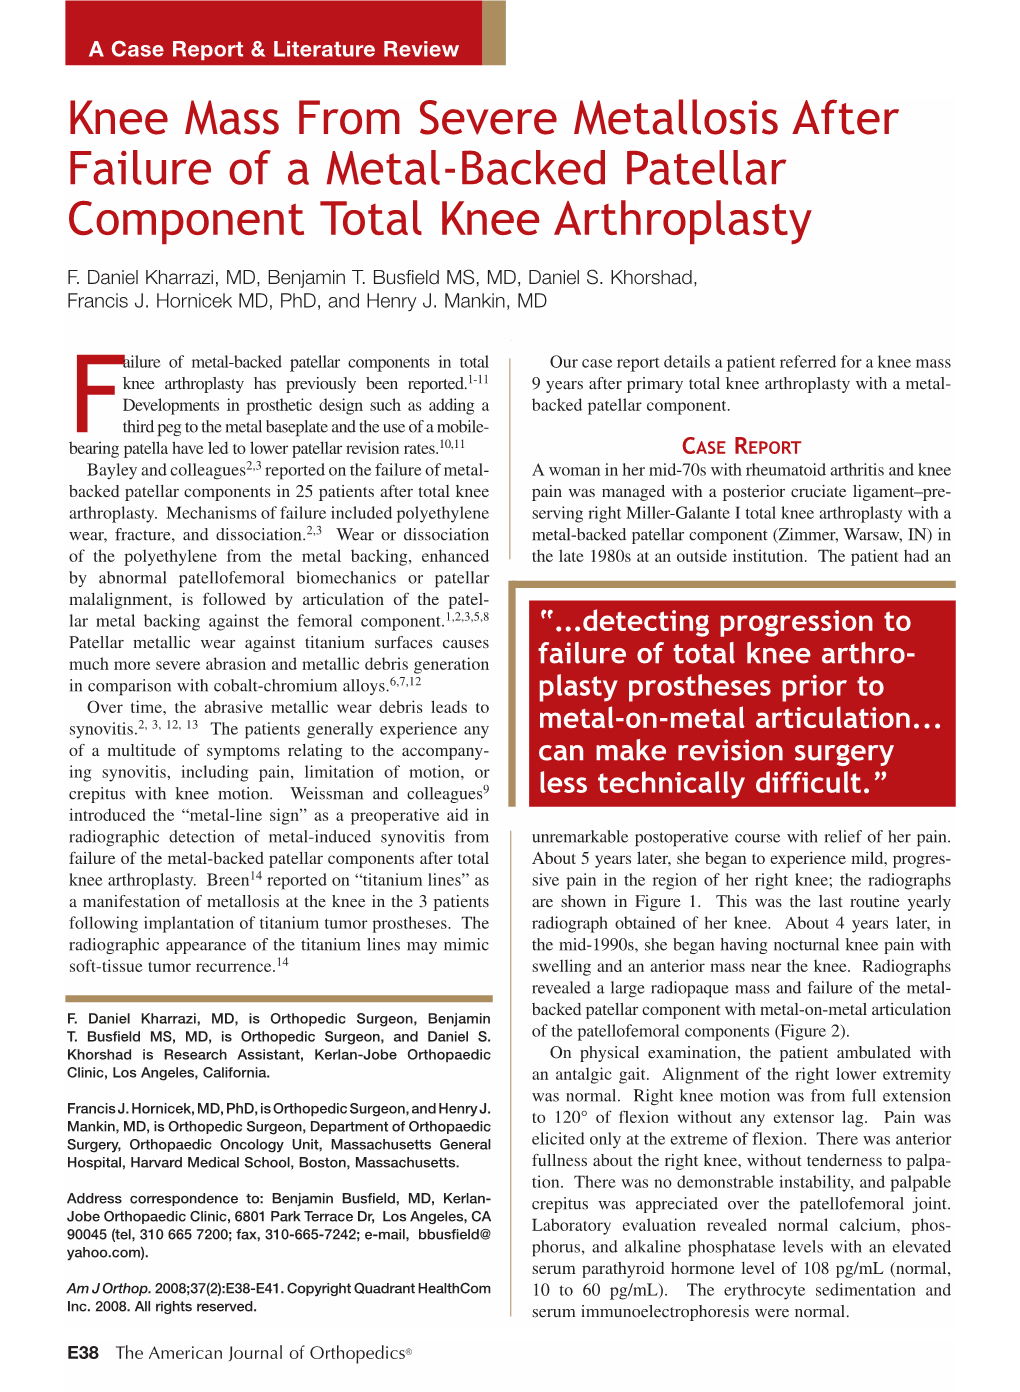 Knee Mass from Severe Metallosis After Failure of a Metal-Backed Patellar Component Total Knee Arthroplasty